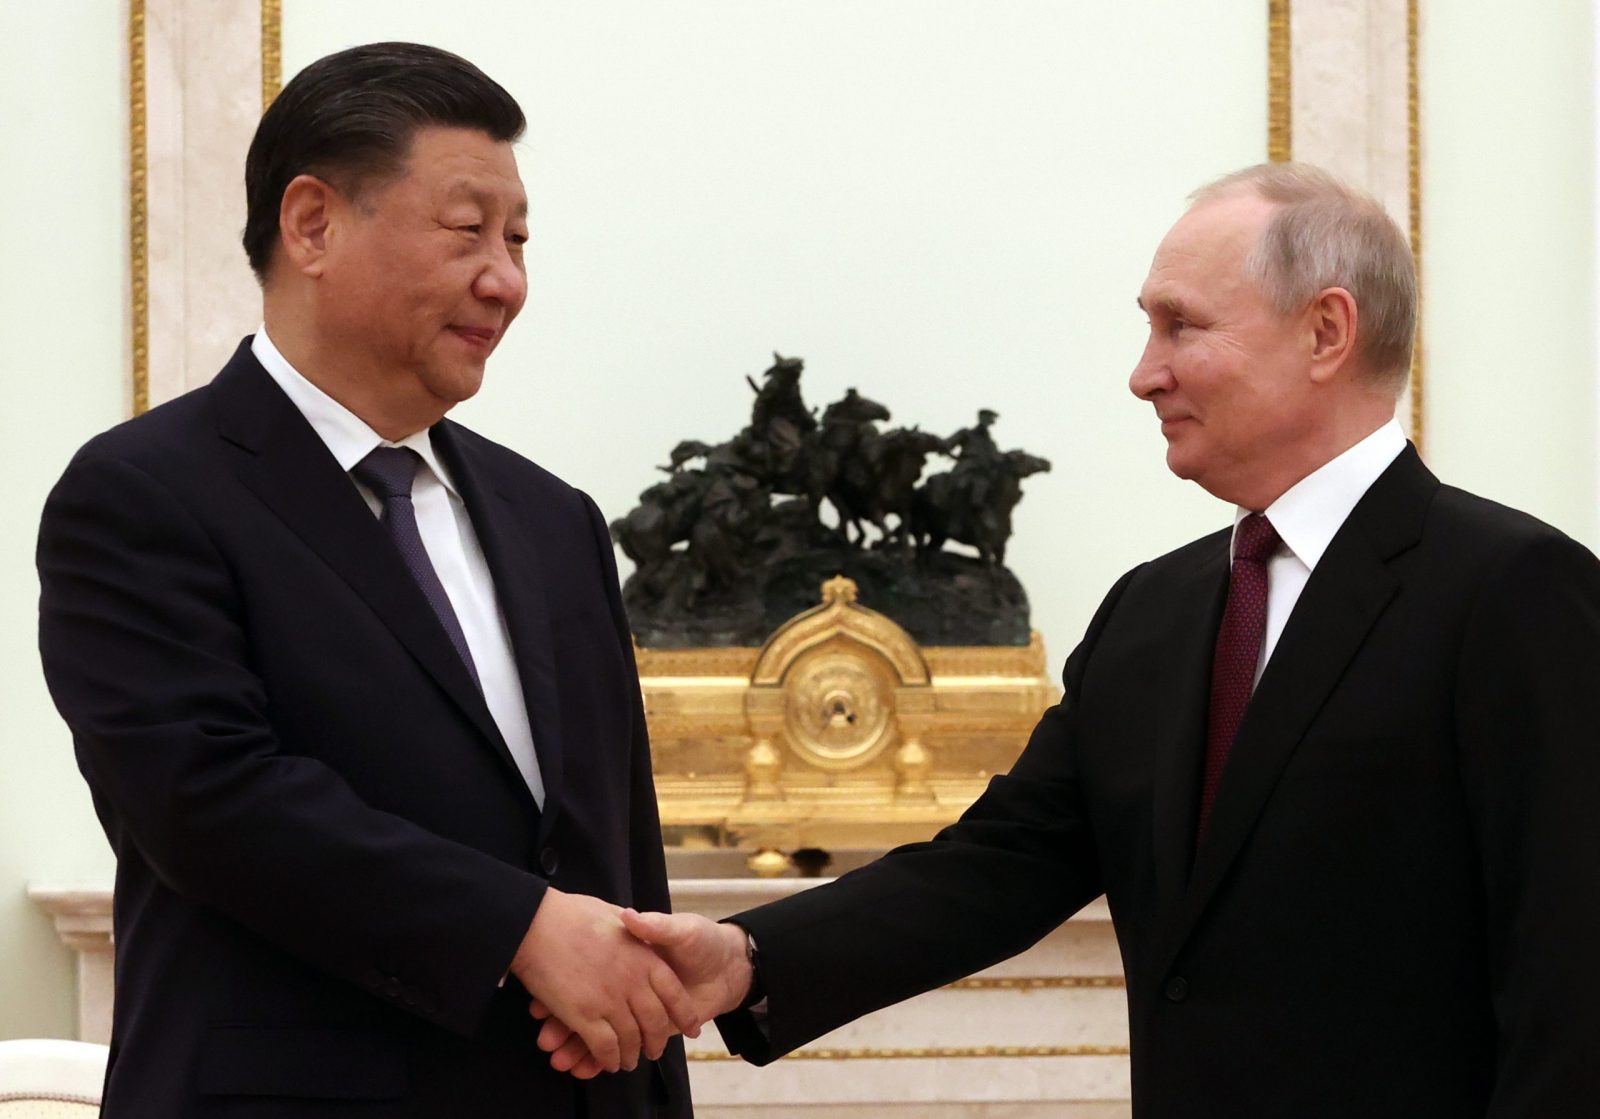 epa10533764 Russian President Vladimir Putin (R) shakes hands with Chinese President Xi Jinping (L) during their meeting in Moscow Kremlin in Moscow, Russia, 20 March 2023. Chinese President Xi Jinping arrived in Moscow on a three-day visit, which will last from March 20 to 22, according to Russian and Chinese state agencies. Xi Jinping visits Russia on improving joint partnership and developing key areas of Russian-Chinese economic cooperation.  EPA/SERGEI KARPUHIN / SPUTNIK / KREMLIN POOL MANDATORY CREDIT